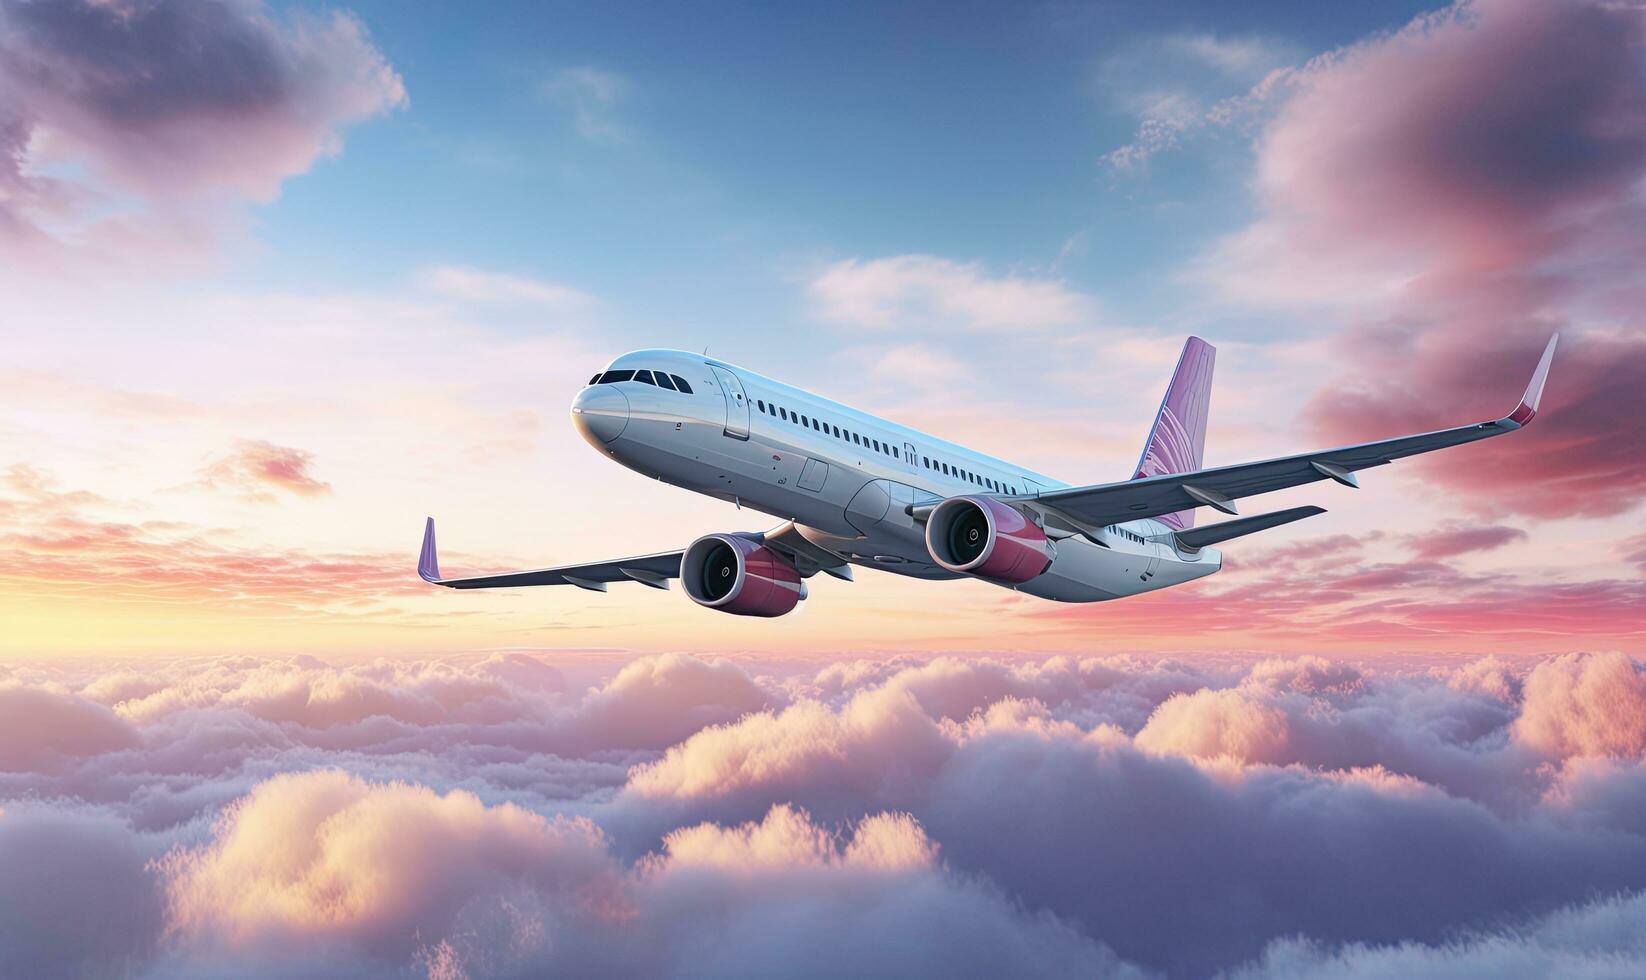 Airplane in sky background photo